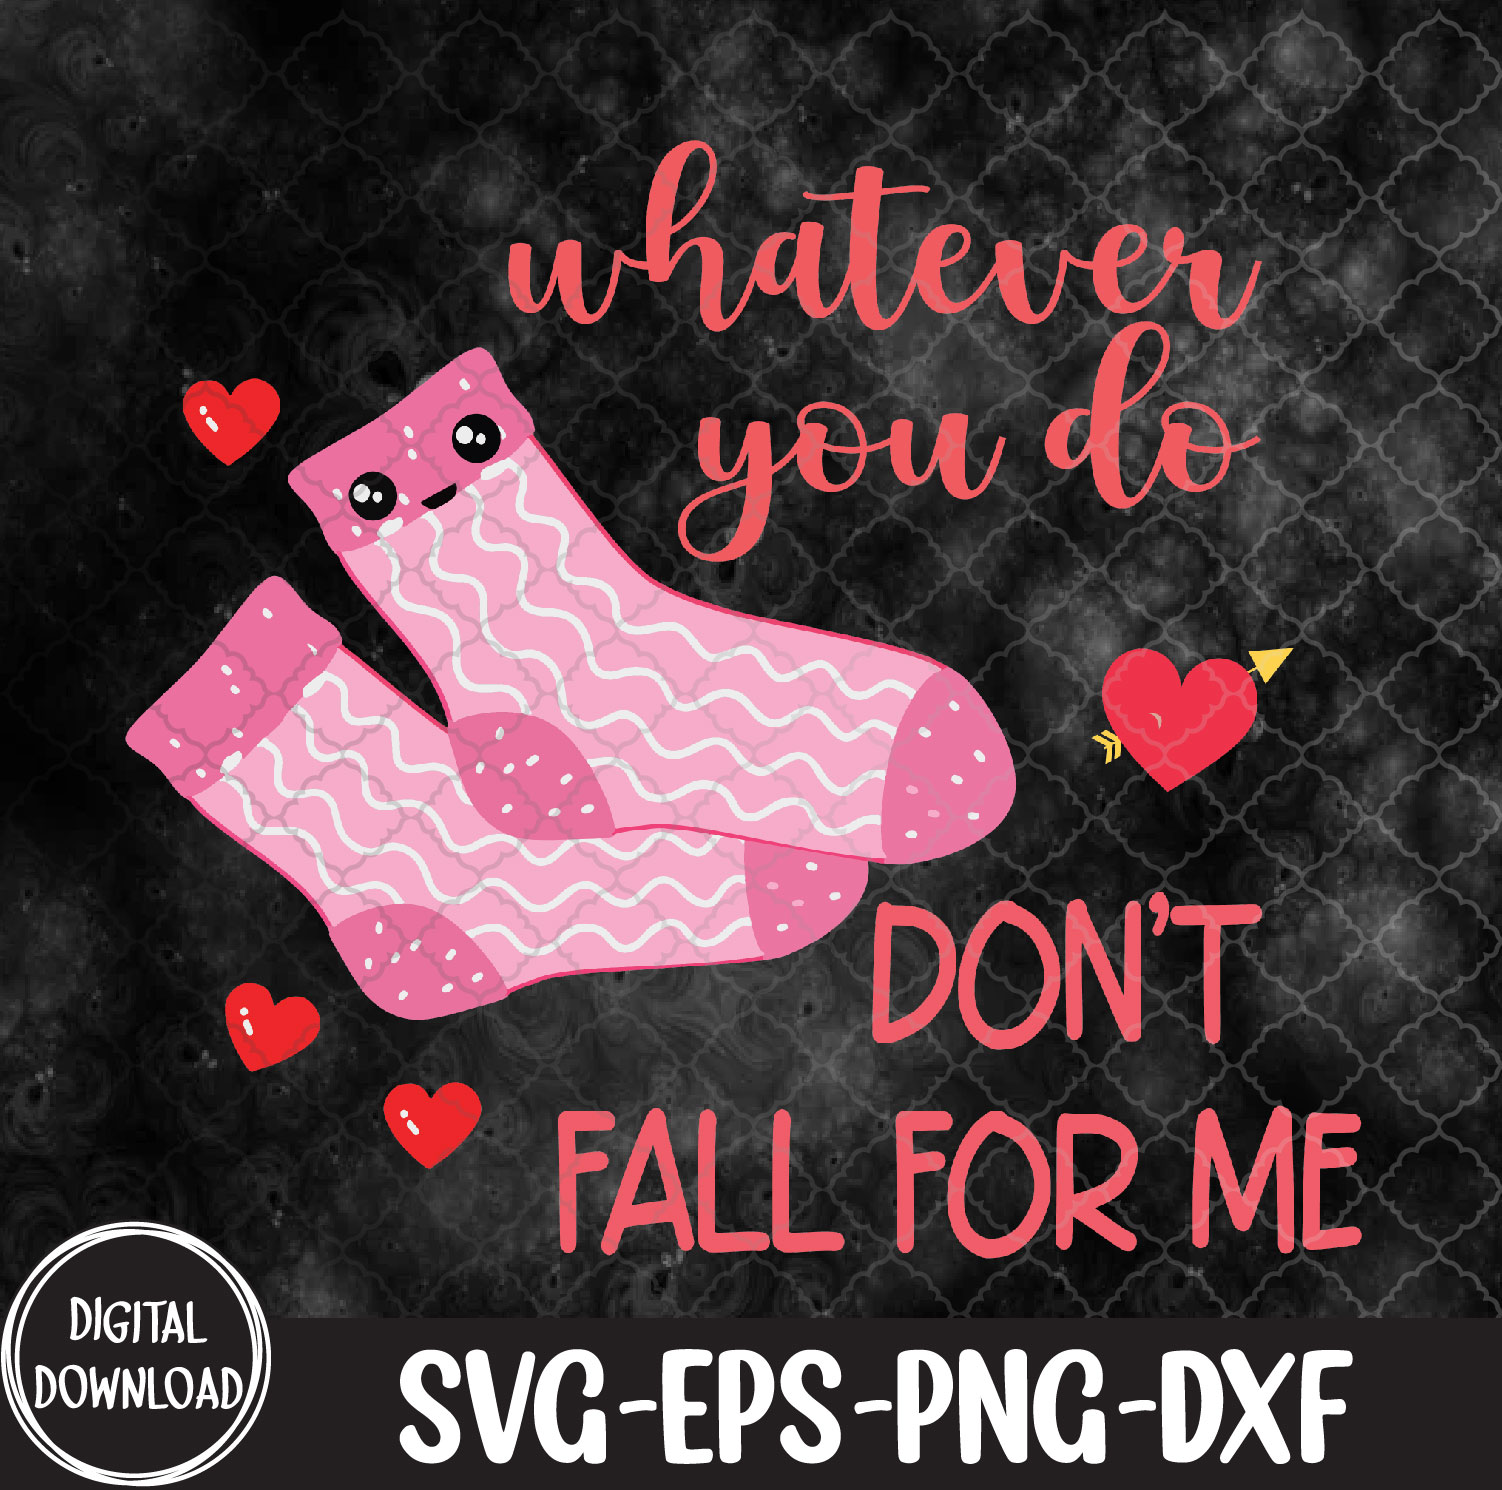 WTMNEW9file 09 29 Valentine Whatever You Do Don't Fall For Me RN PCT CNA Nurse, Svg, Eps, Png, Dxf